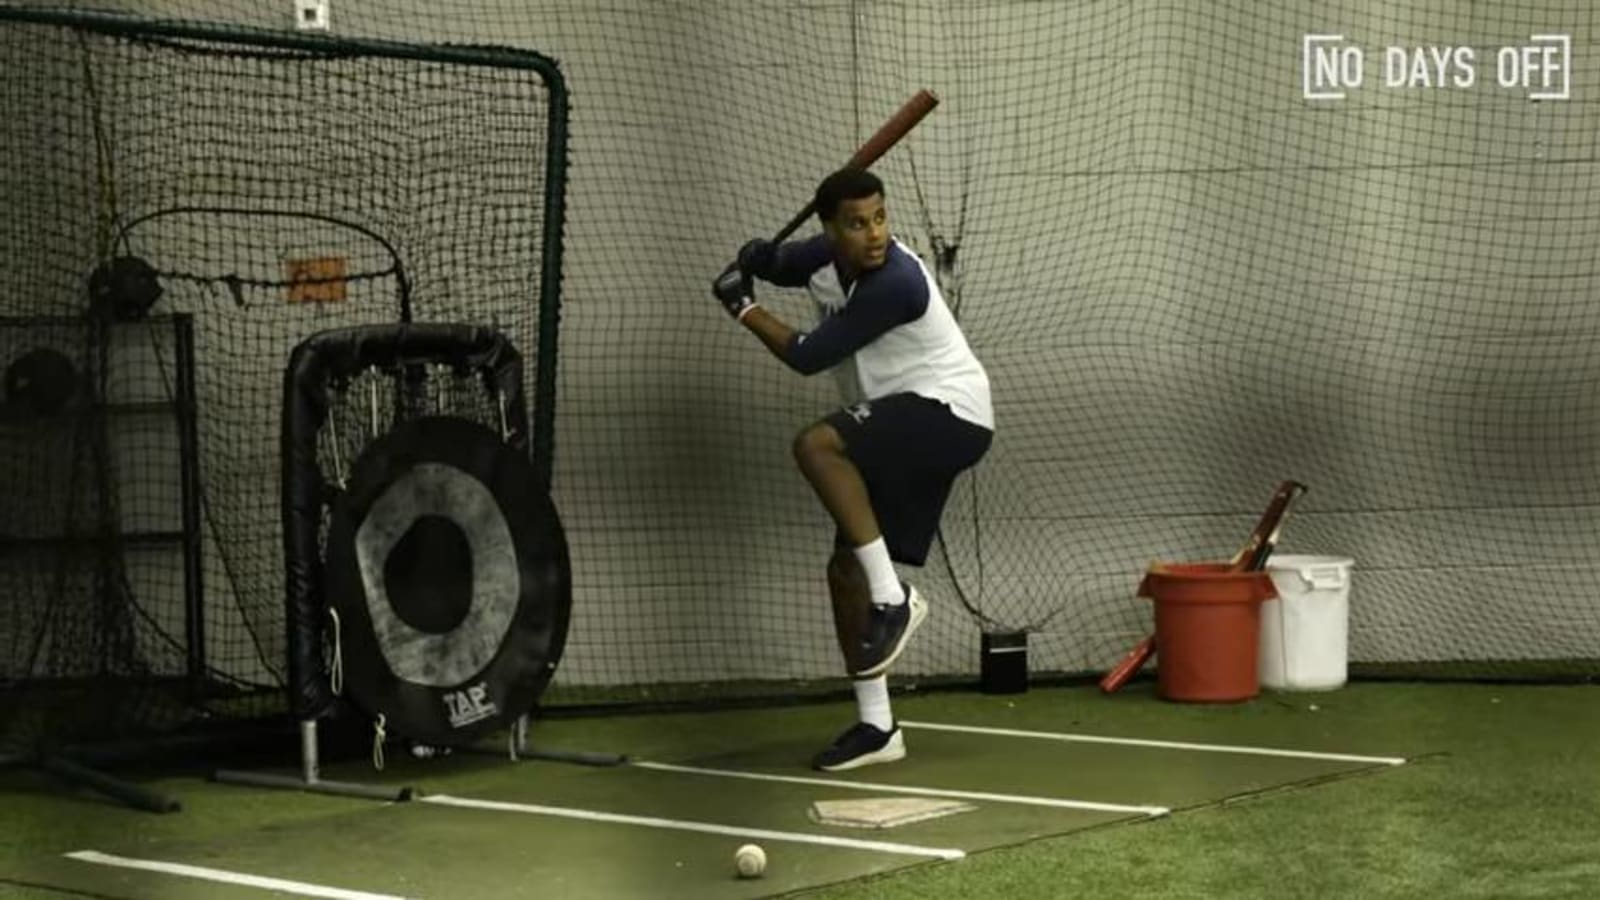 Watch: Pittsburgh Pirates 2nd round pick Lonnie White Jr. profiled in new "No Days Off" episode